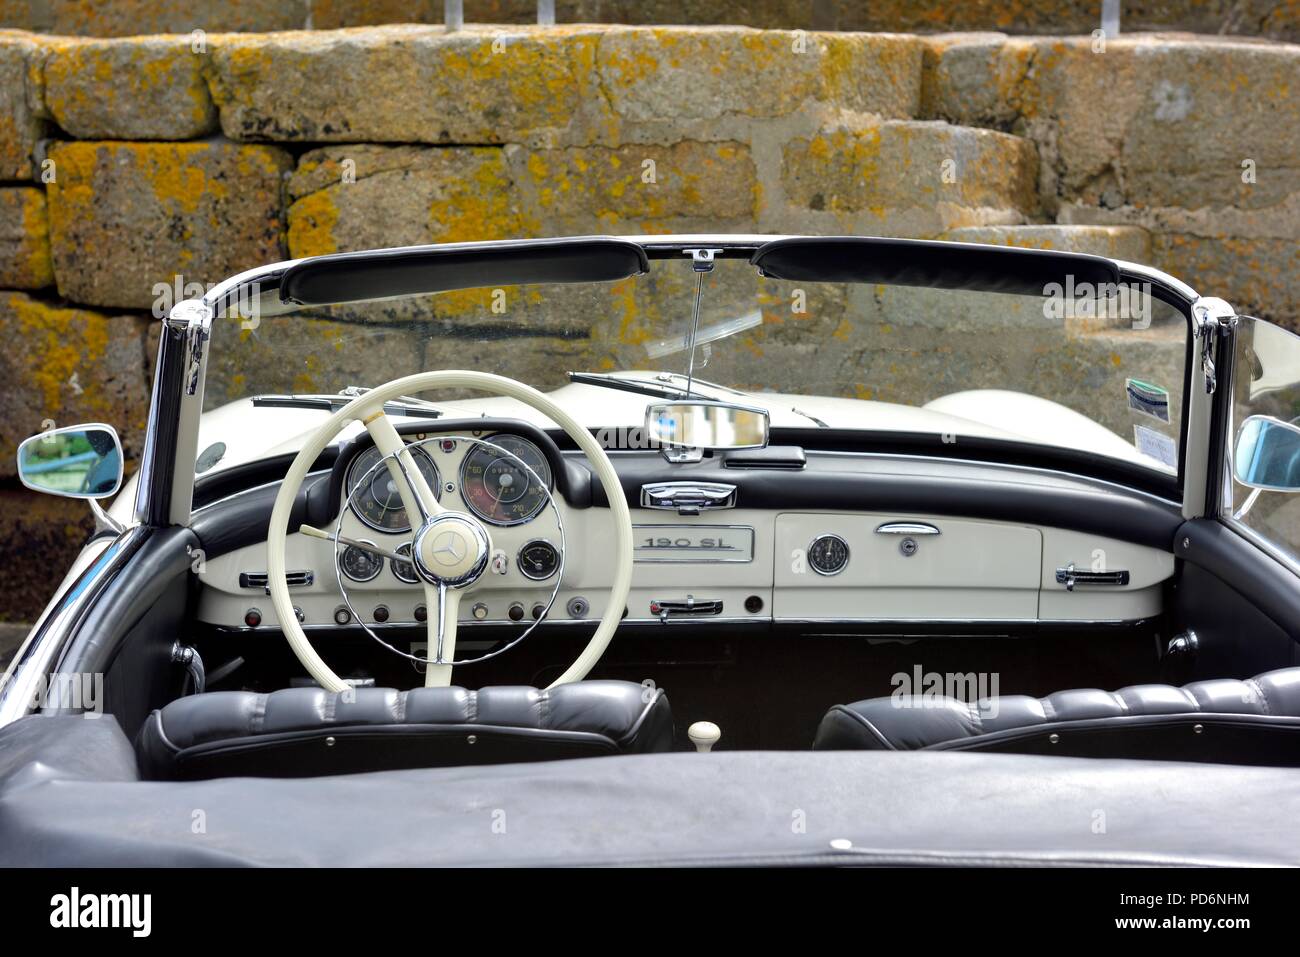 Mercedes 190 SL 2 door Roadster Classic Car passing through the seaside village of Mousehole,Cornwall,England,UK Stock Photo